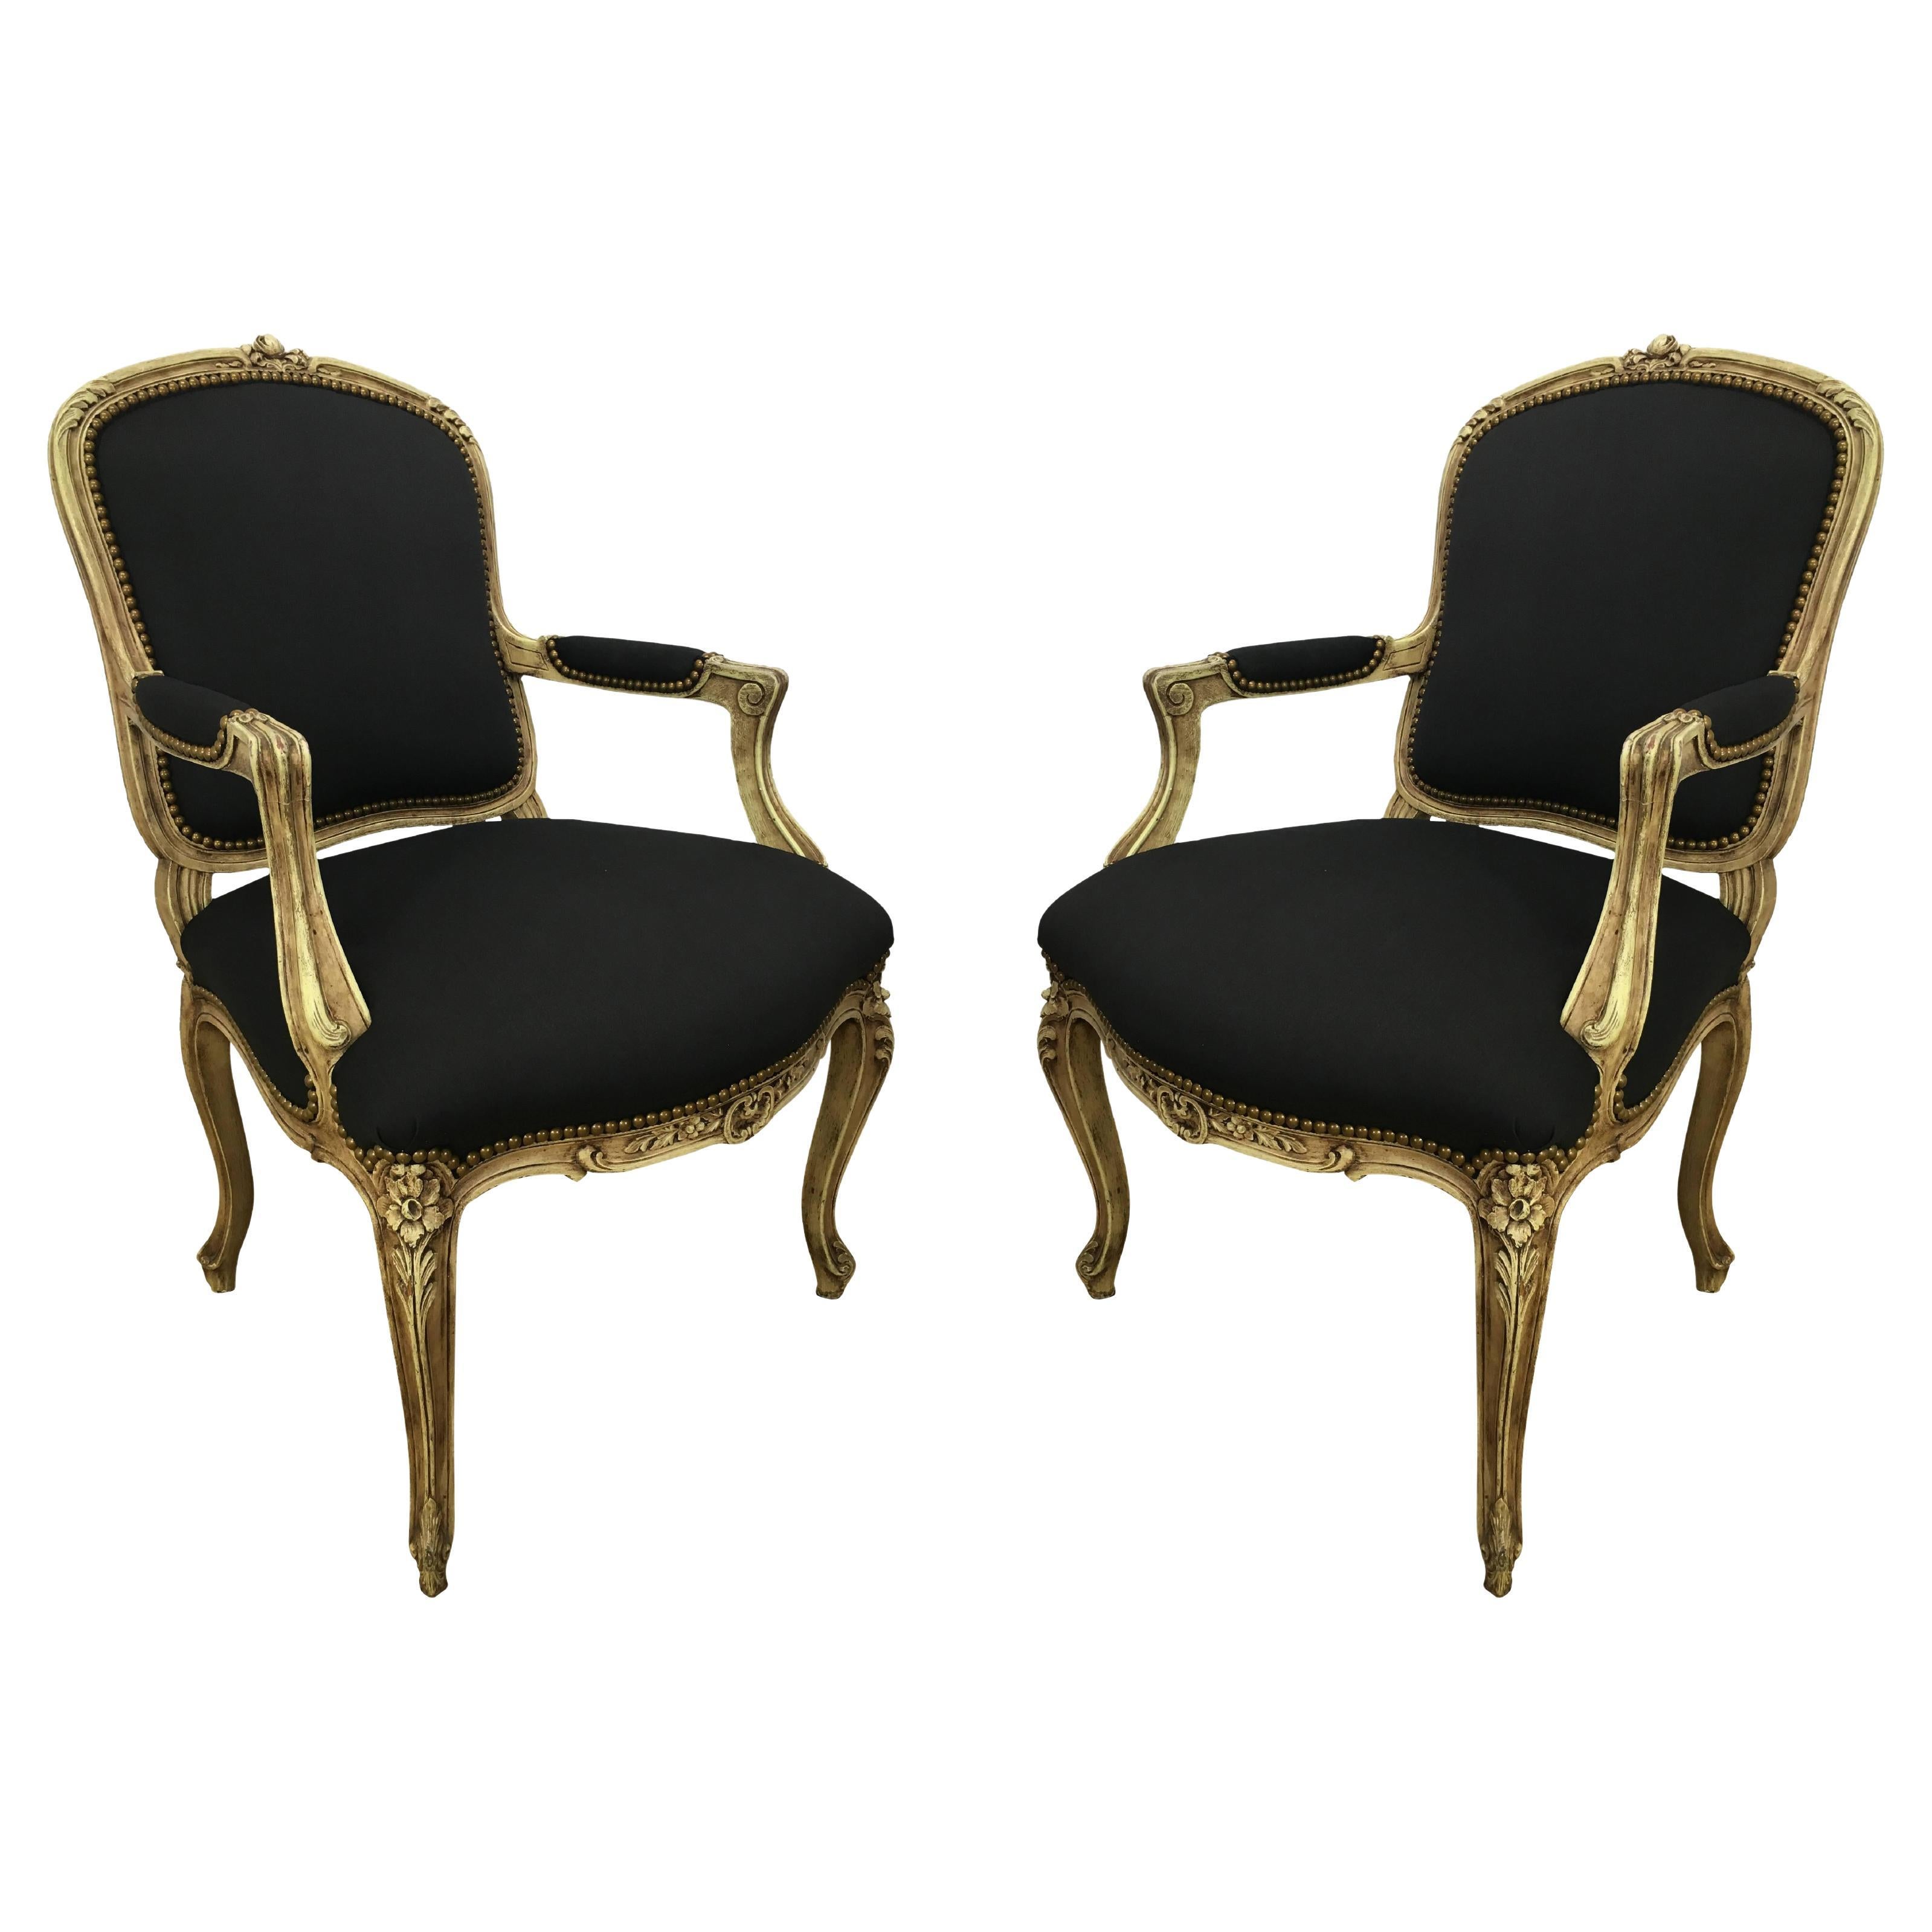 Pair of Louis XVI Style Cream Painted Armchairs of Fauteuils